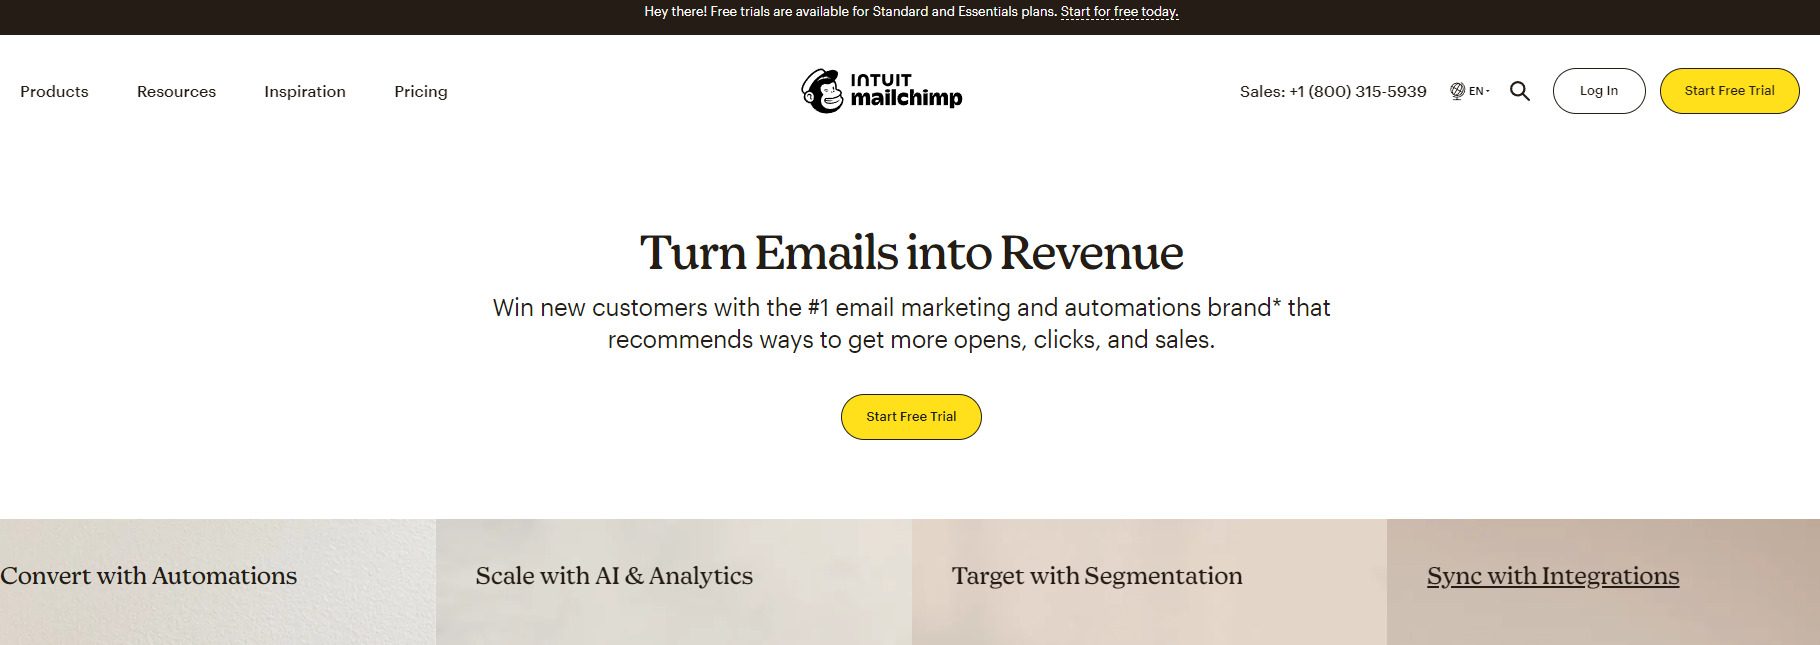 Mailchimp - The email marketing giant